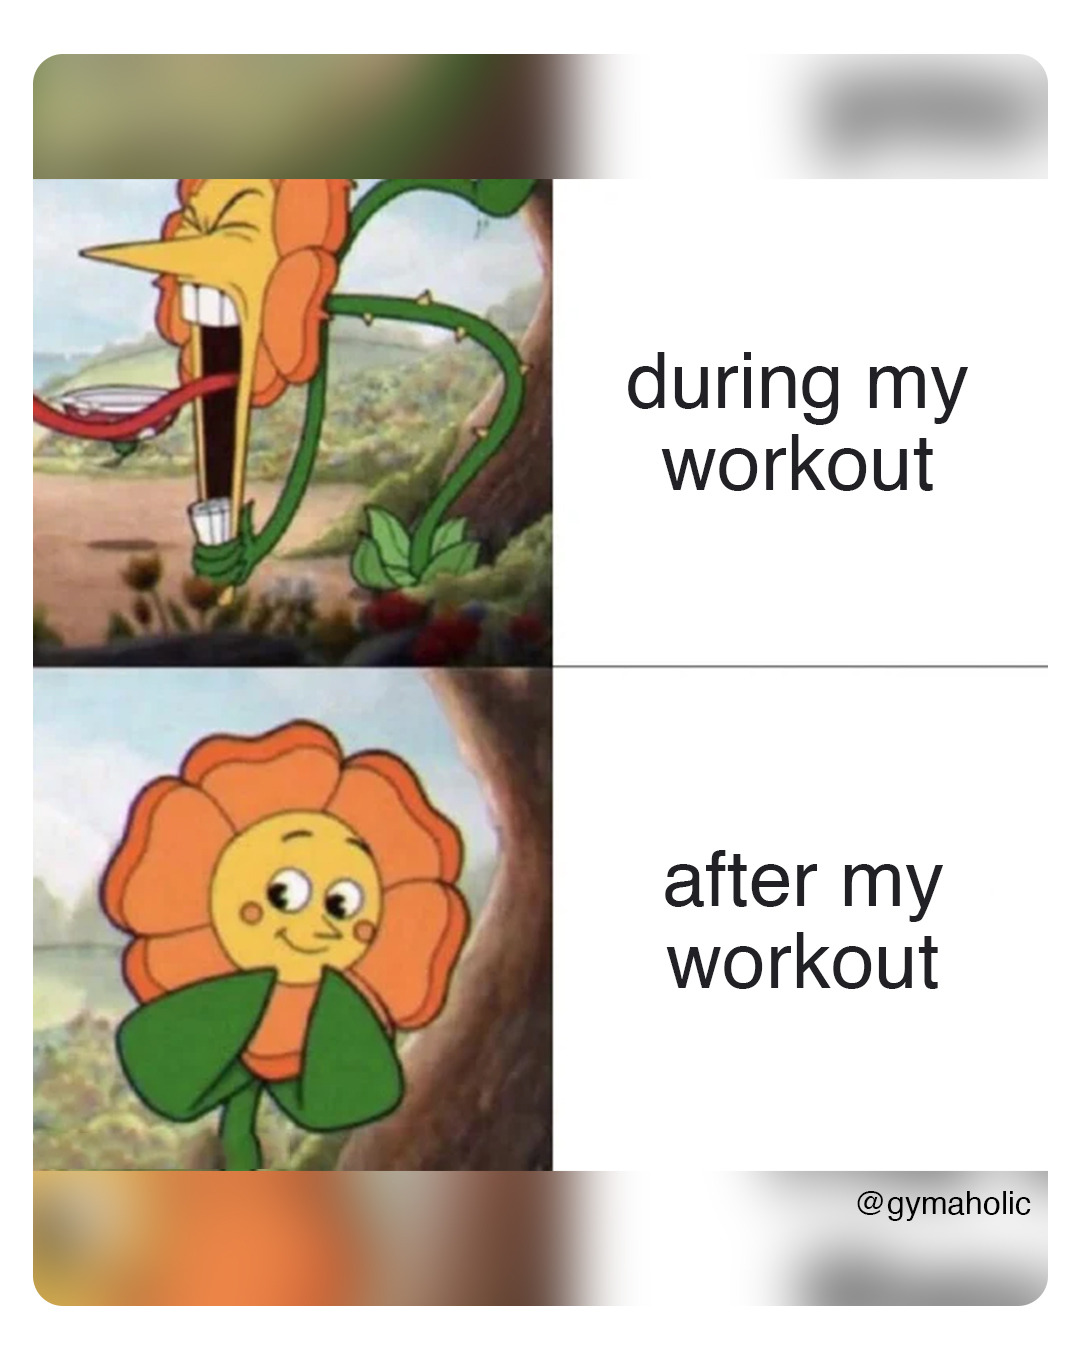 During my workout vs. after my workout